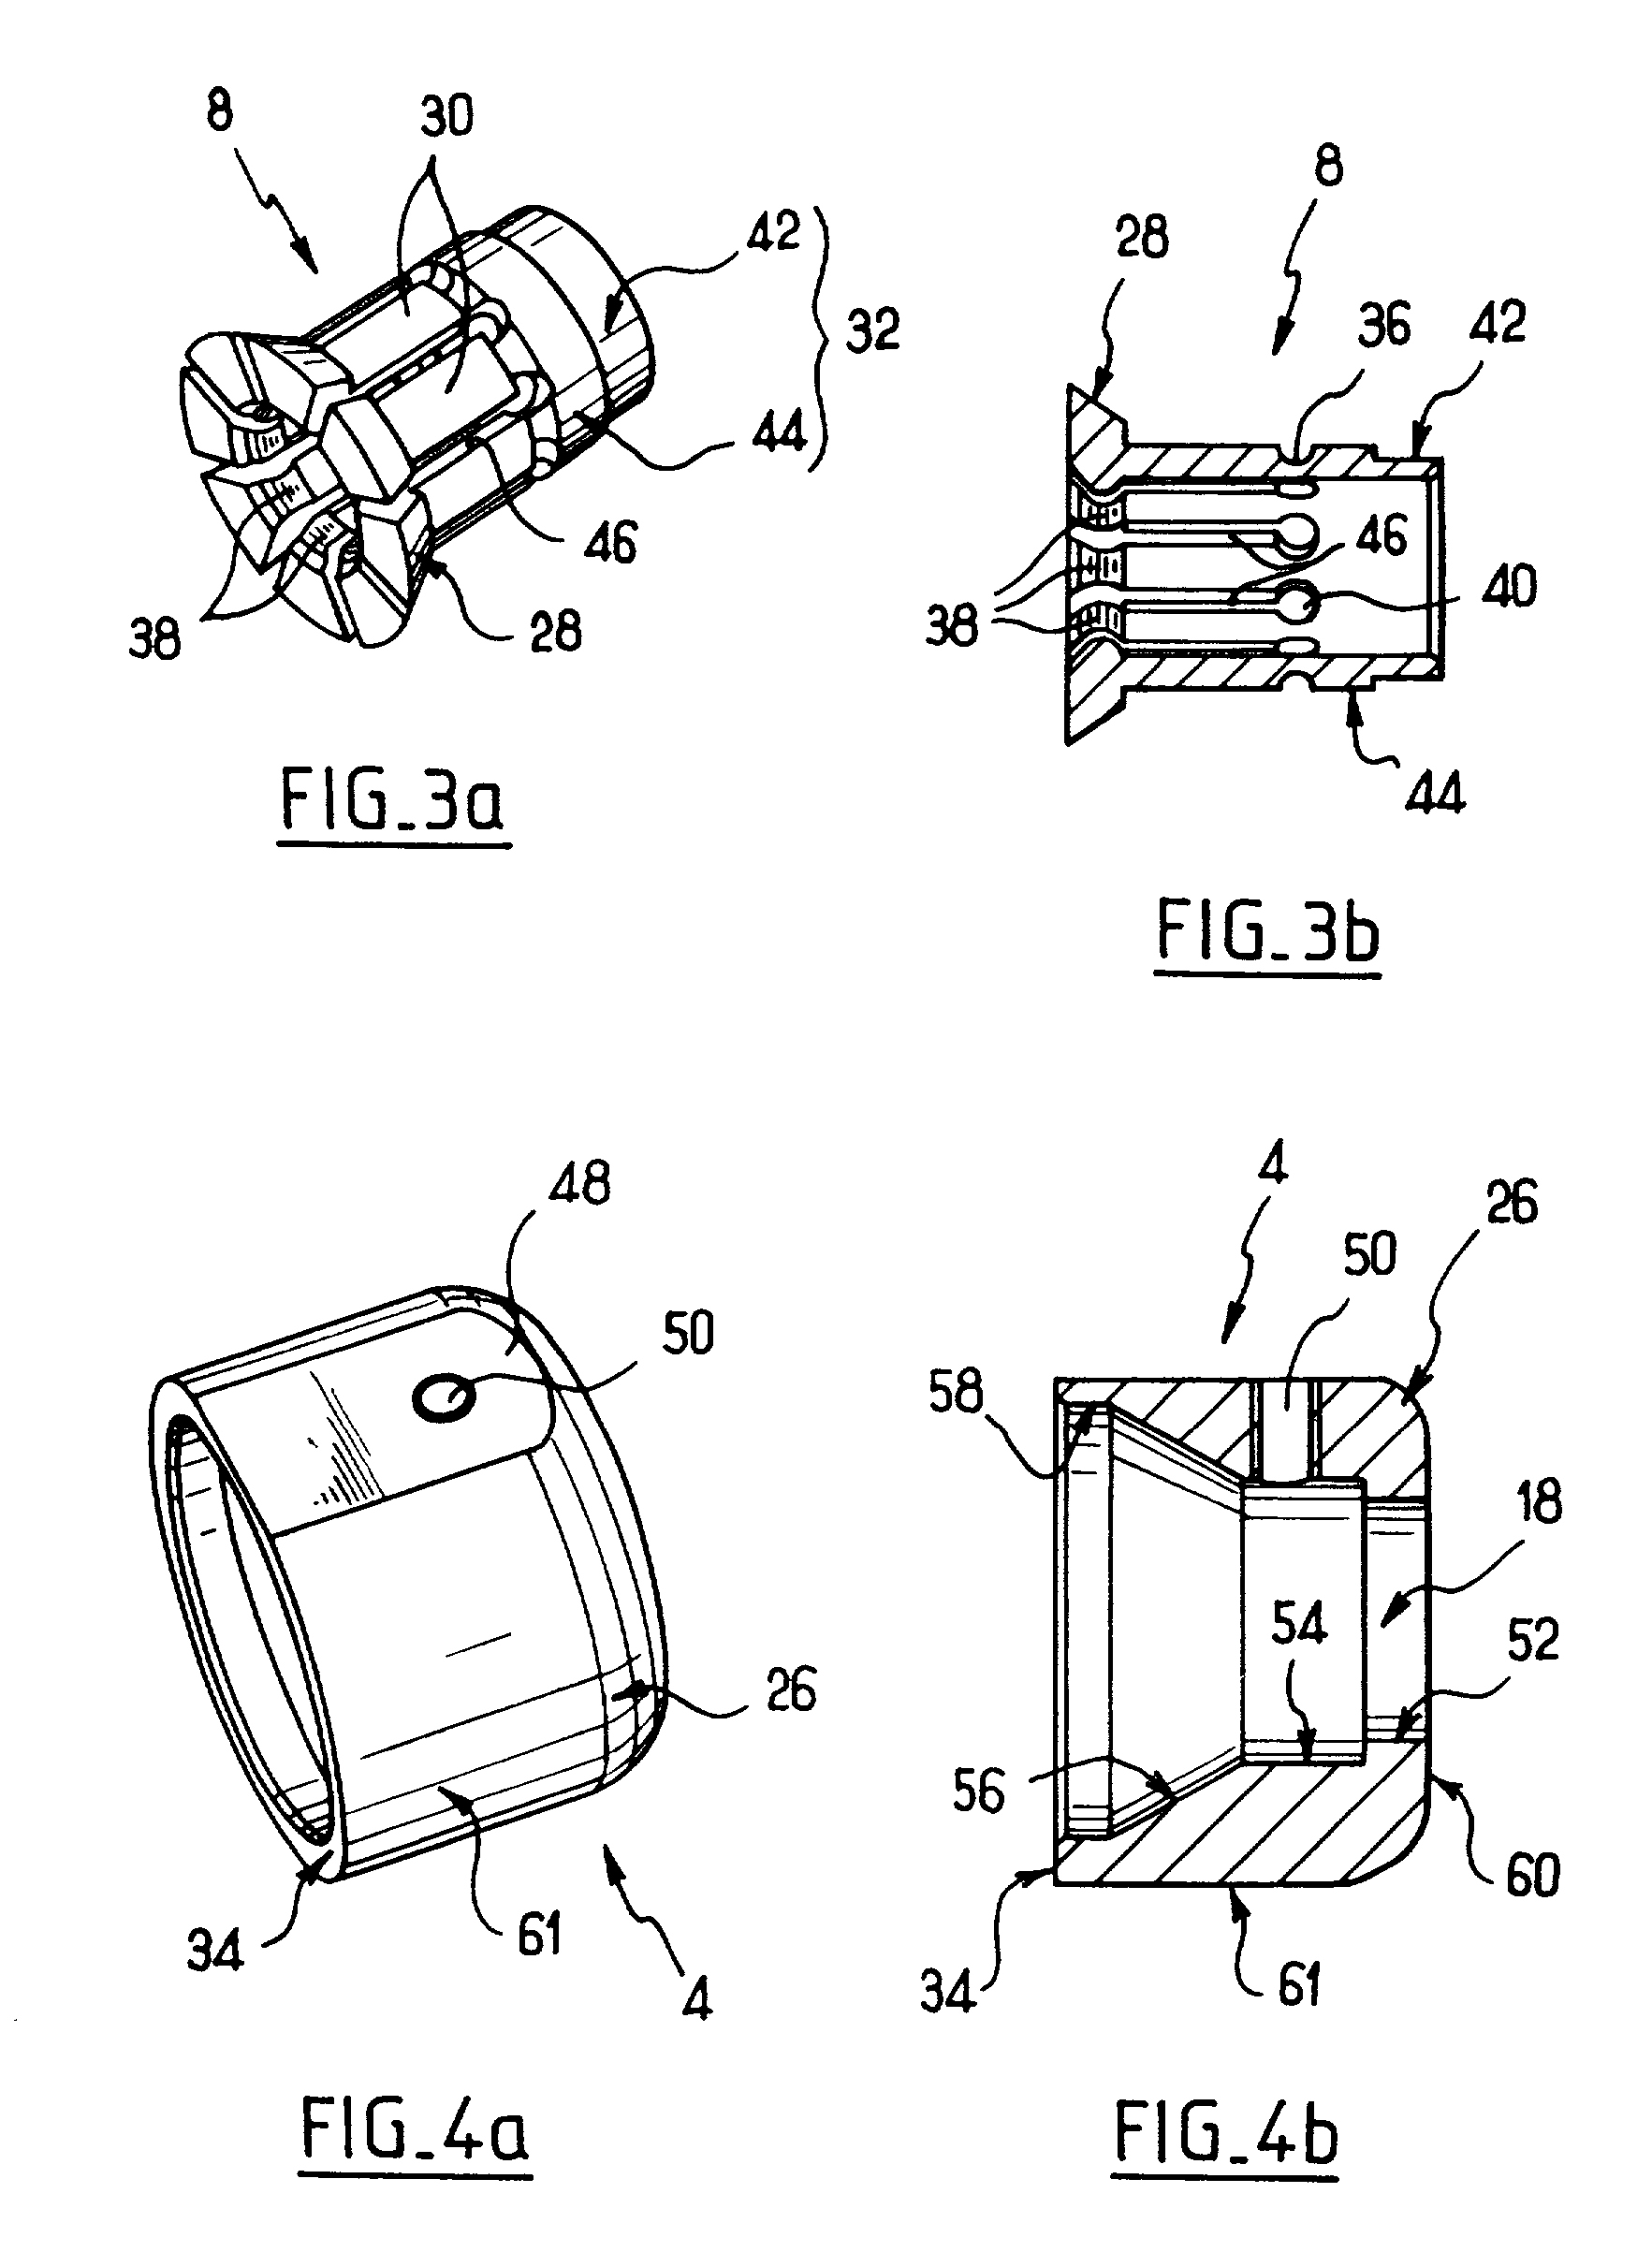 Position-adjustment system for an instrument for surgery of the spine